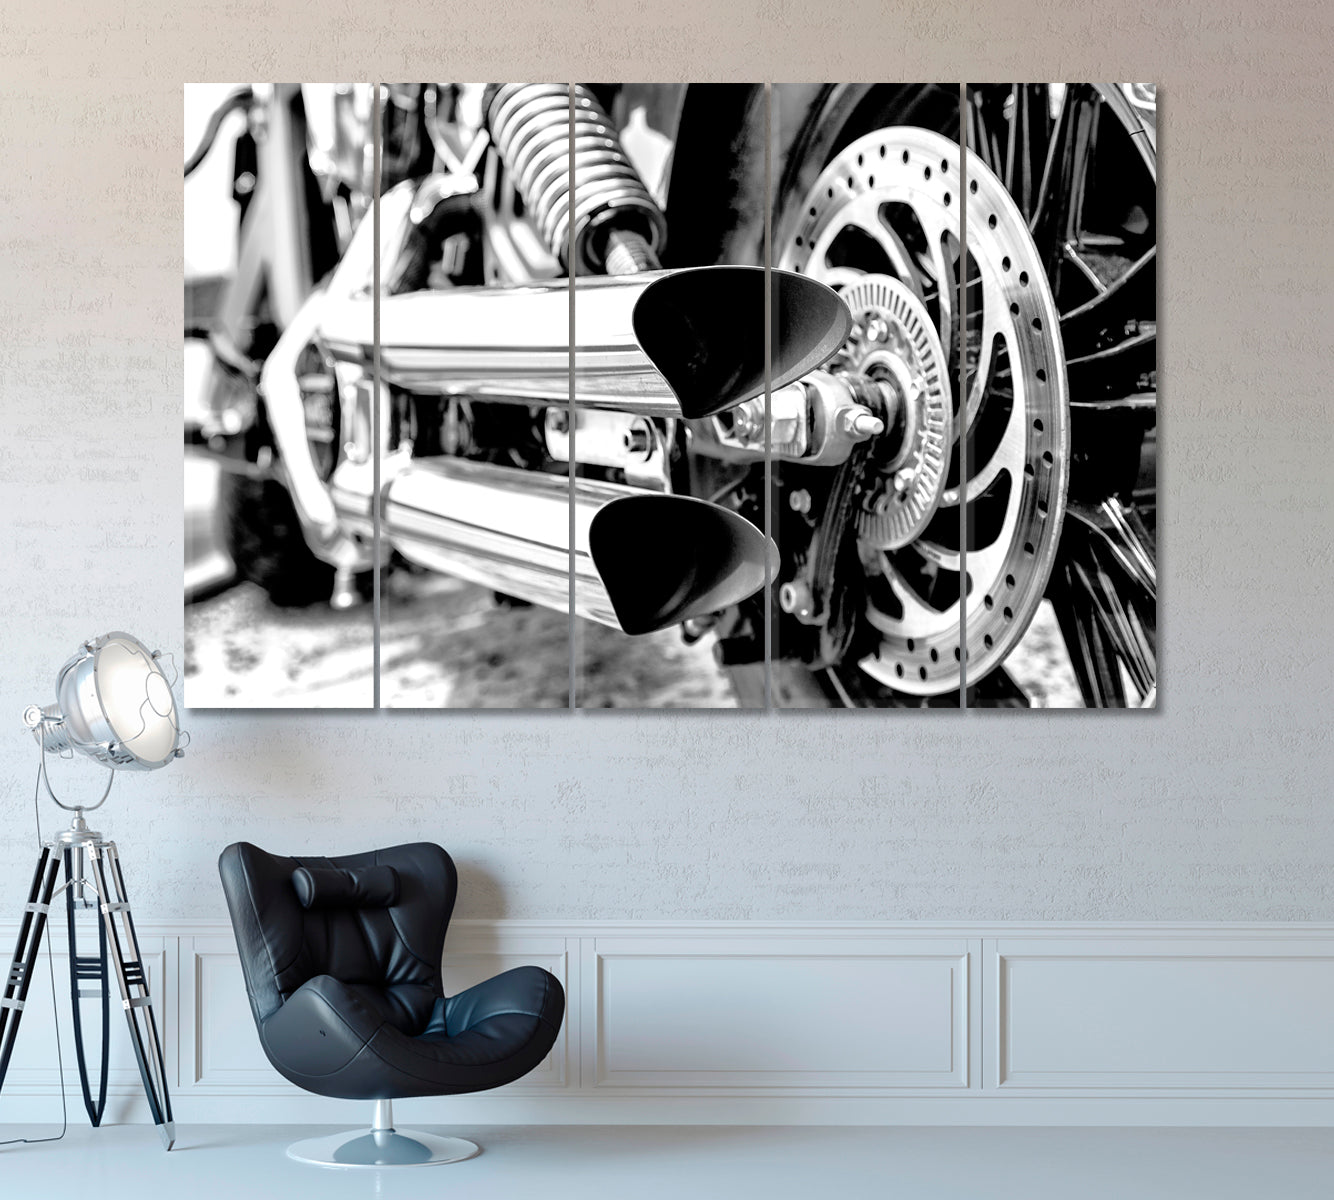 American Chopper Motorcycle Canvas Print ArtLexy 5 Panels 36"x24" inches 